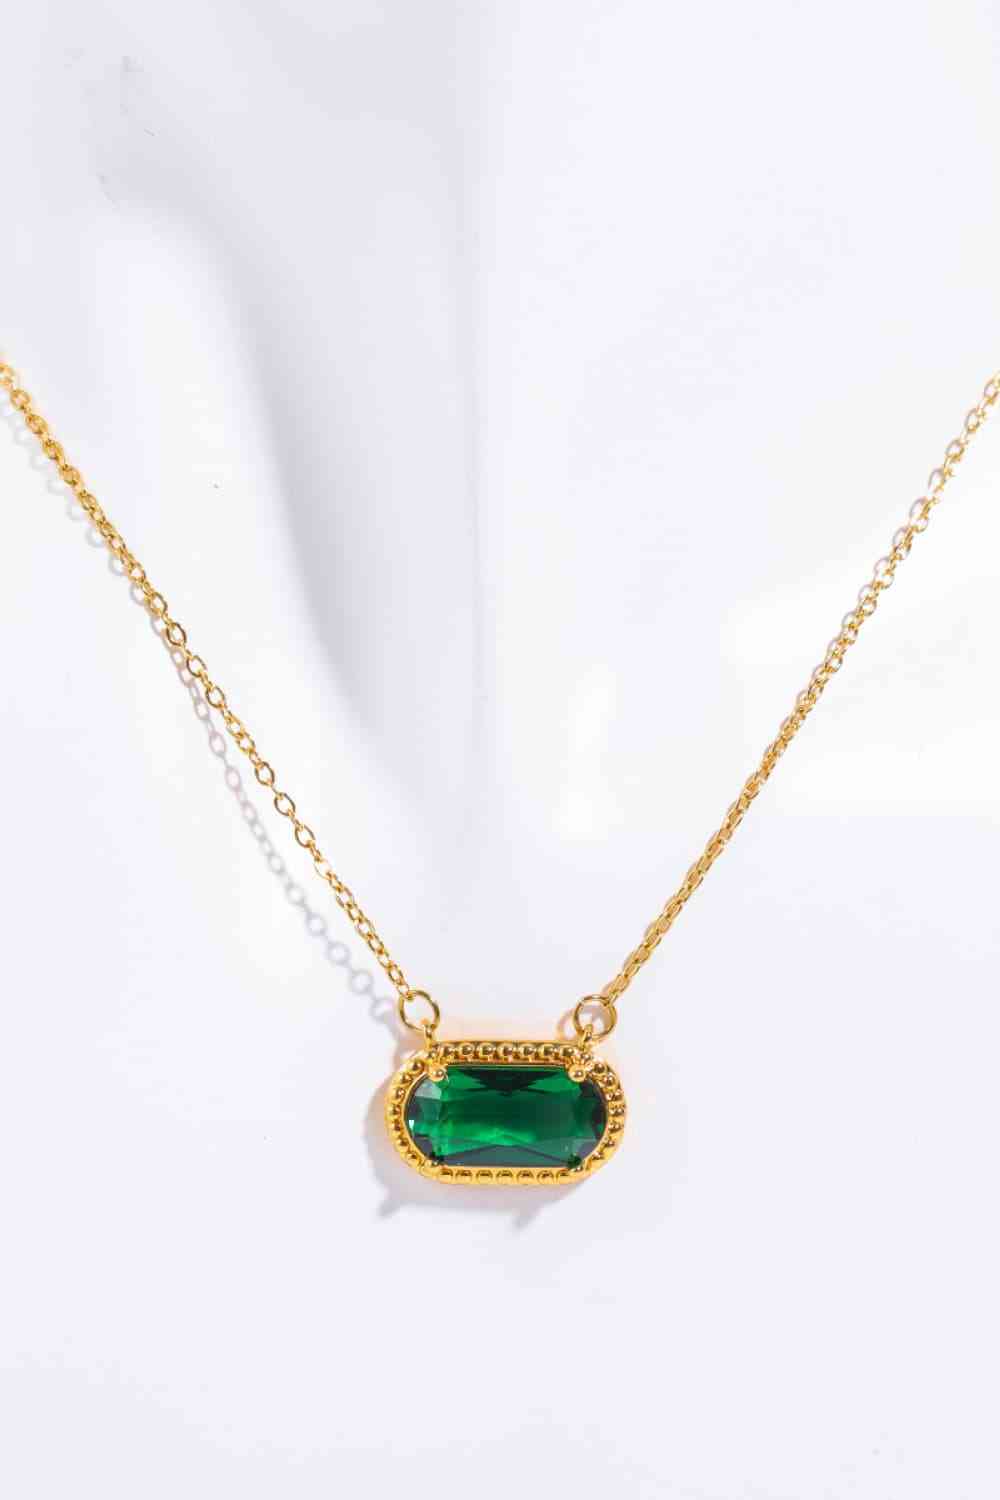 Trendy 14K Gold-Plated Pendant Necklace